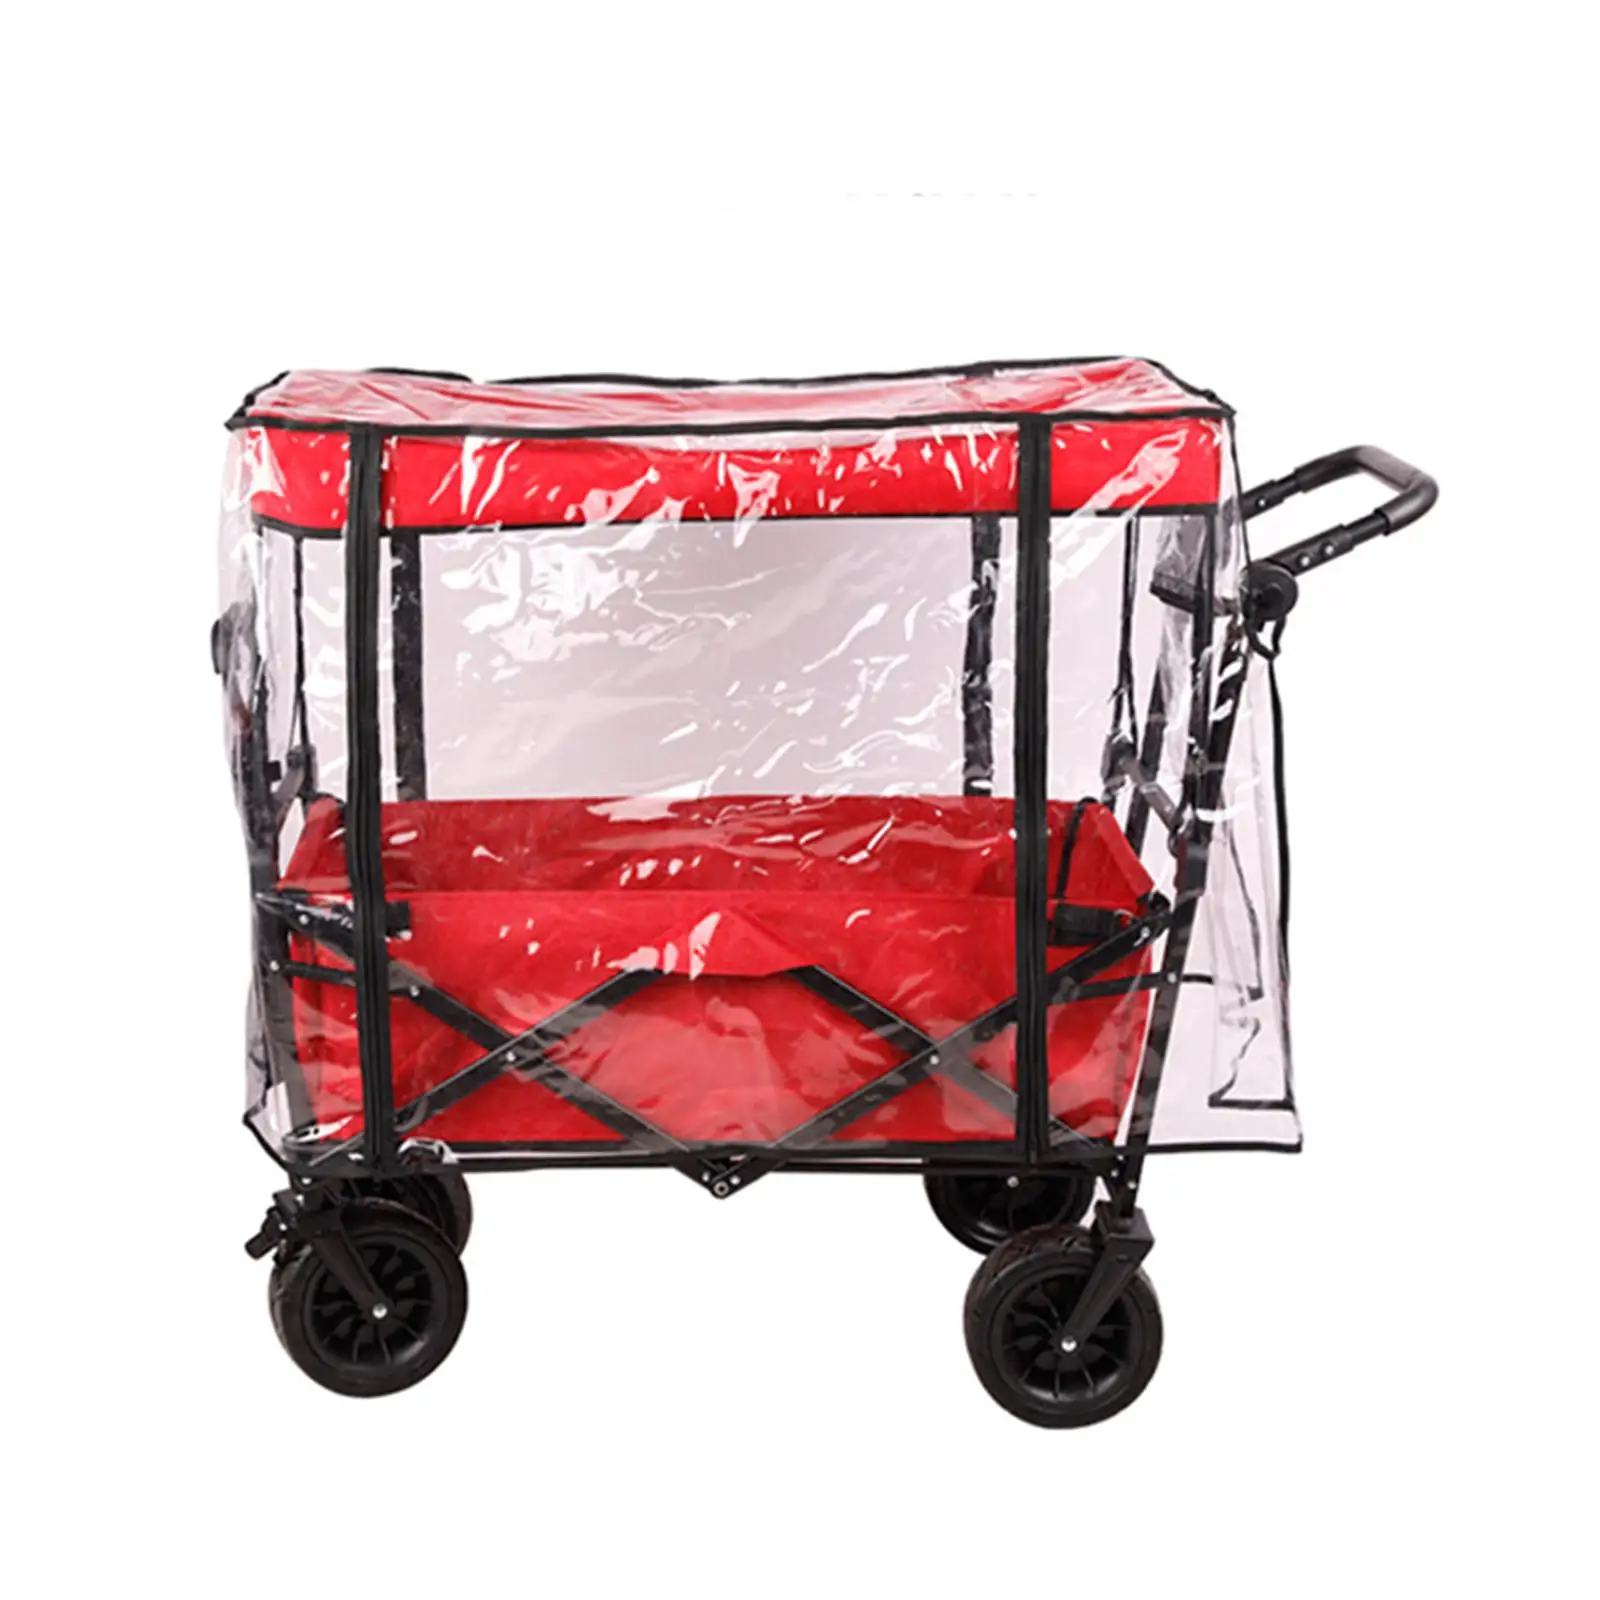 Collapsible Wagon Cart Waterproof Cover Canopy Sturdy Windproof for Shopping